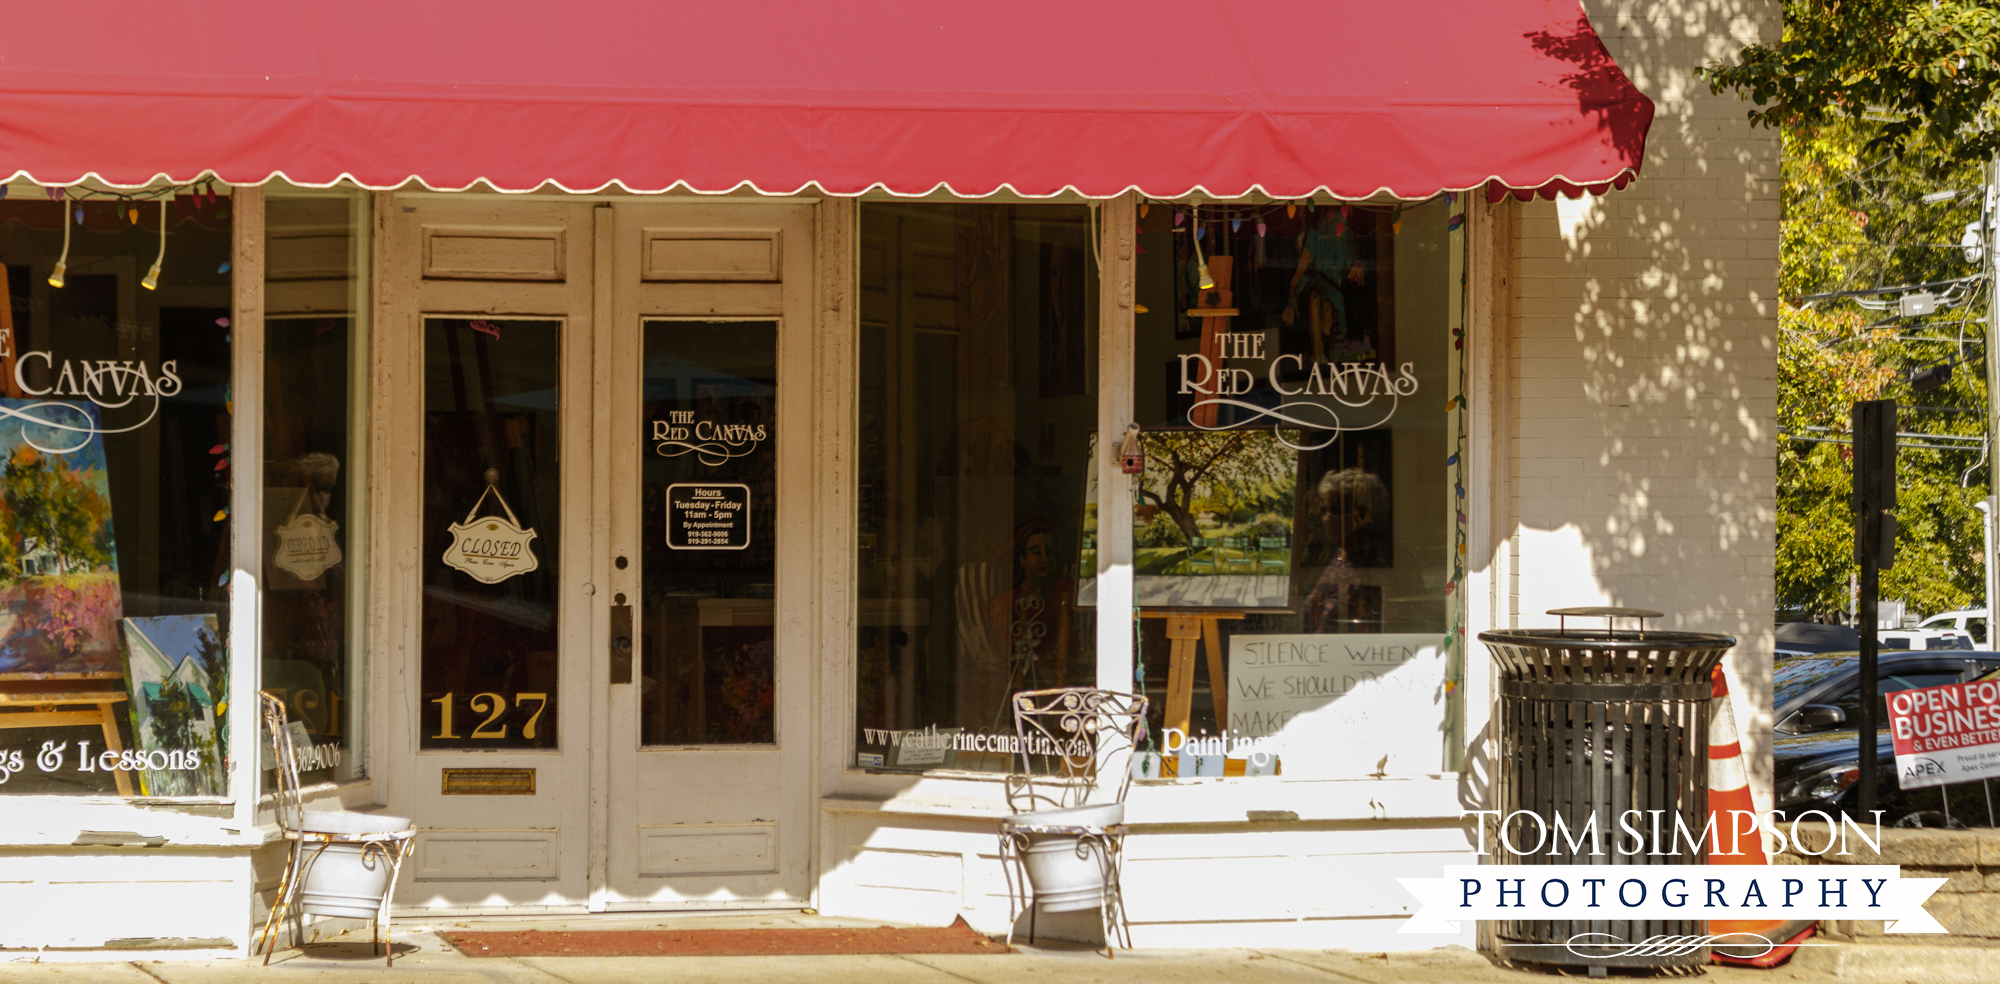 historic storefront with bright red awning